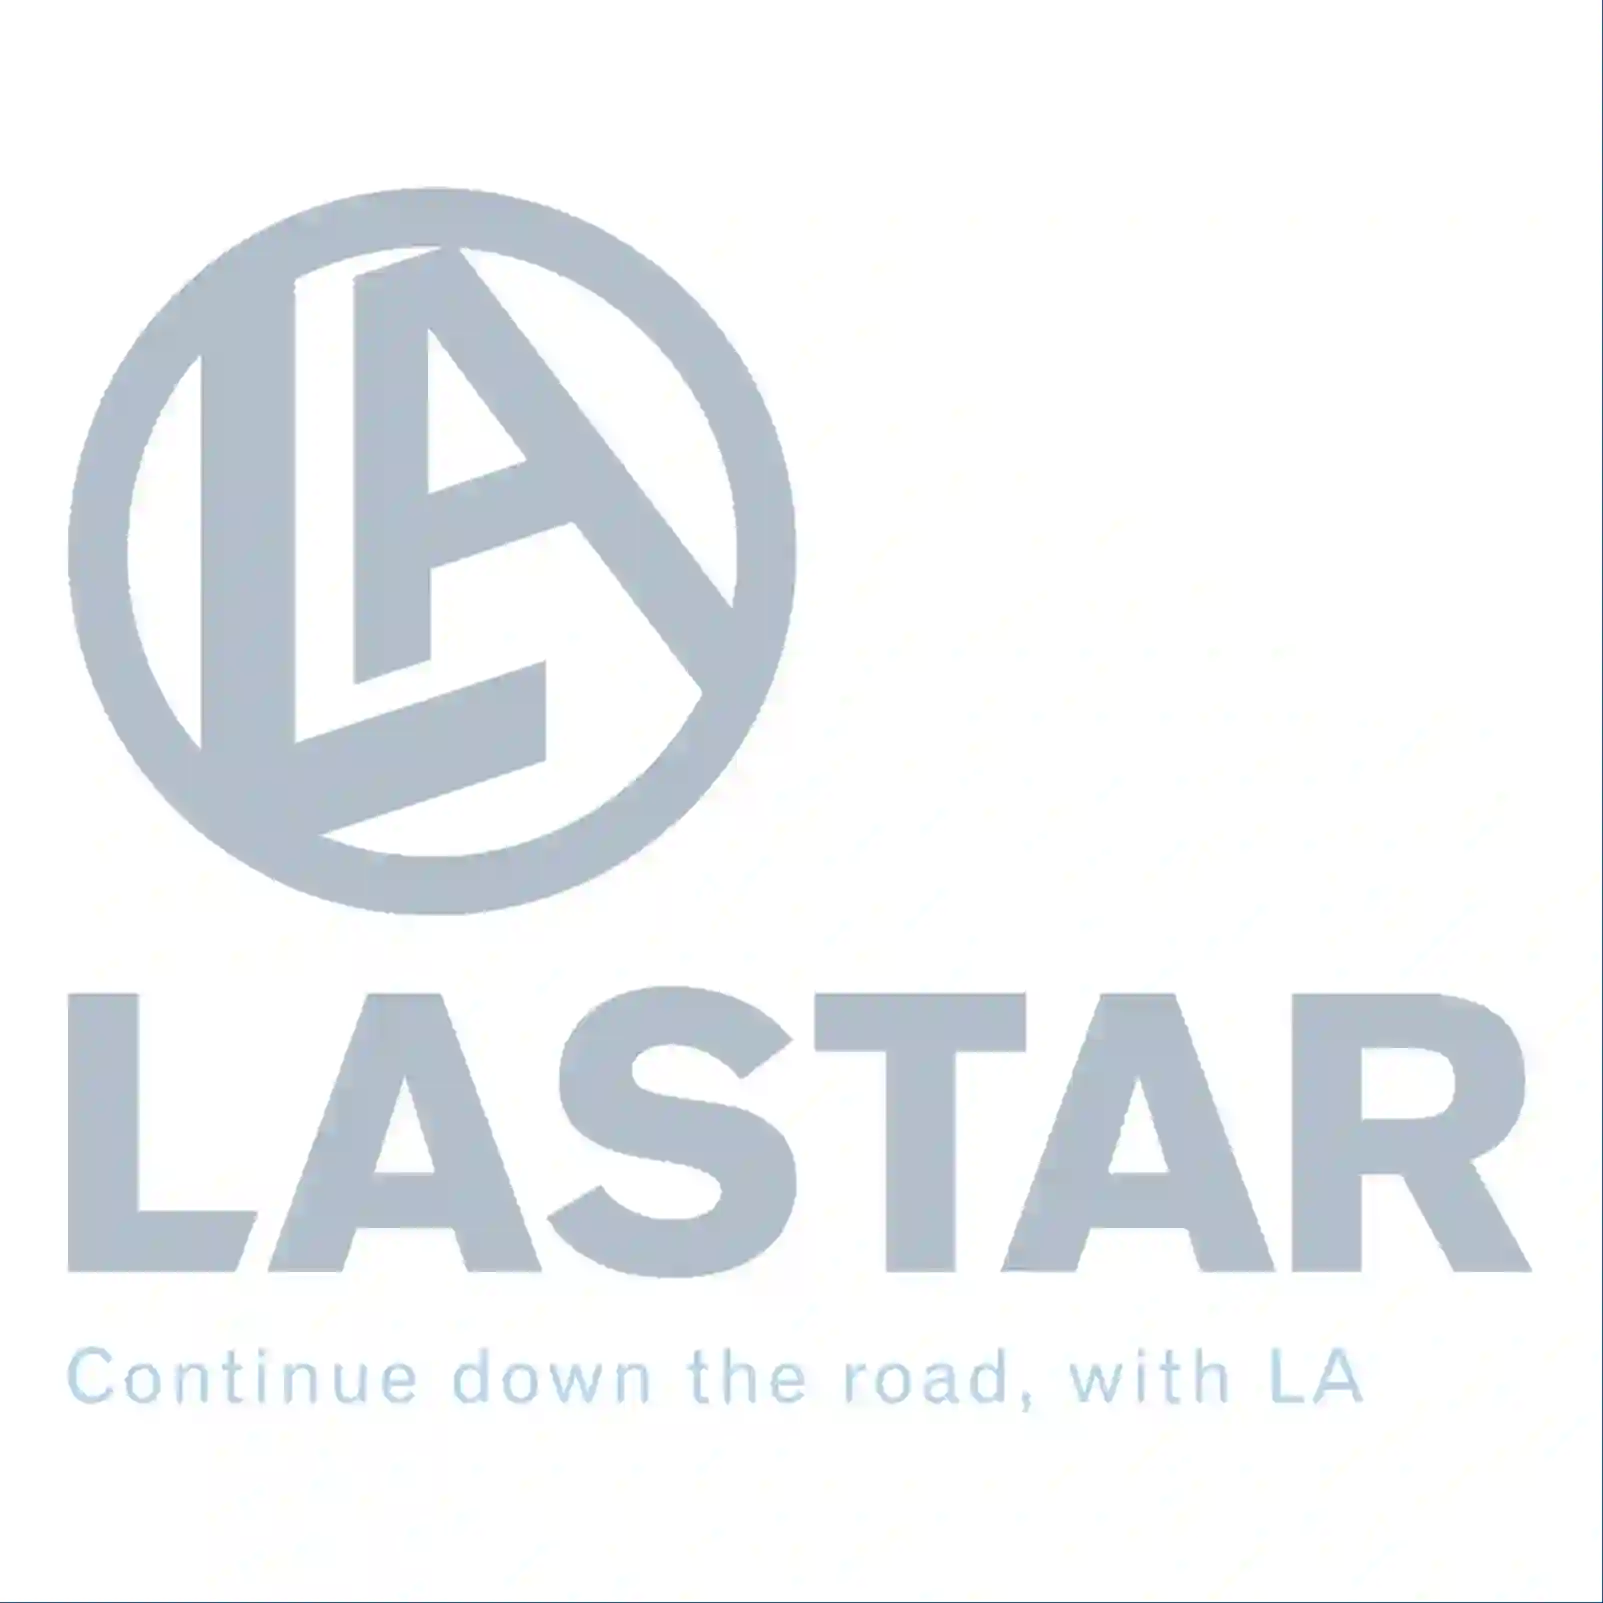  Turn signal lamp, lateral, right, silver || Lastar Spare Part | Truck Spare Parts, Auotomotive Spare Parts